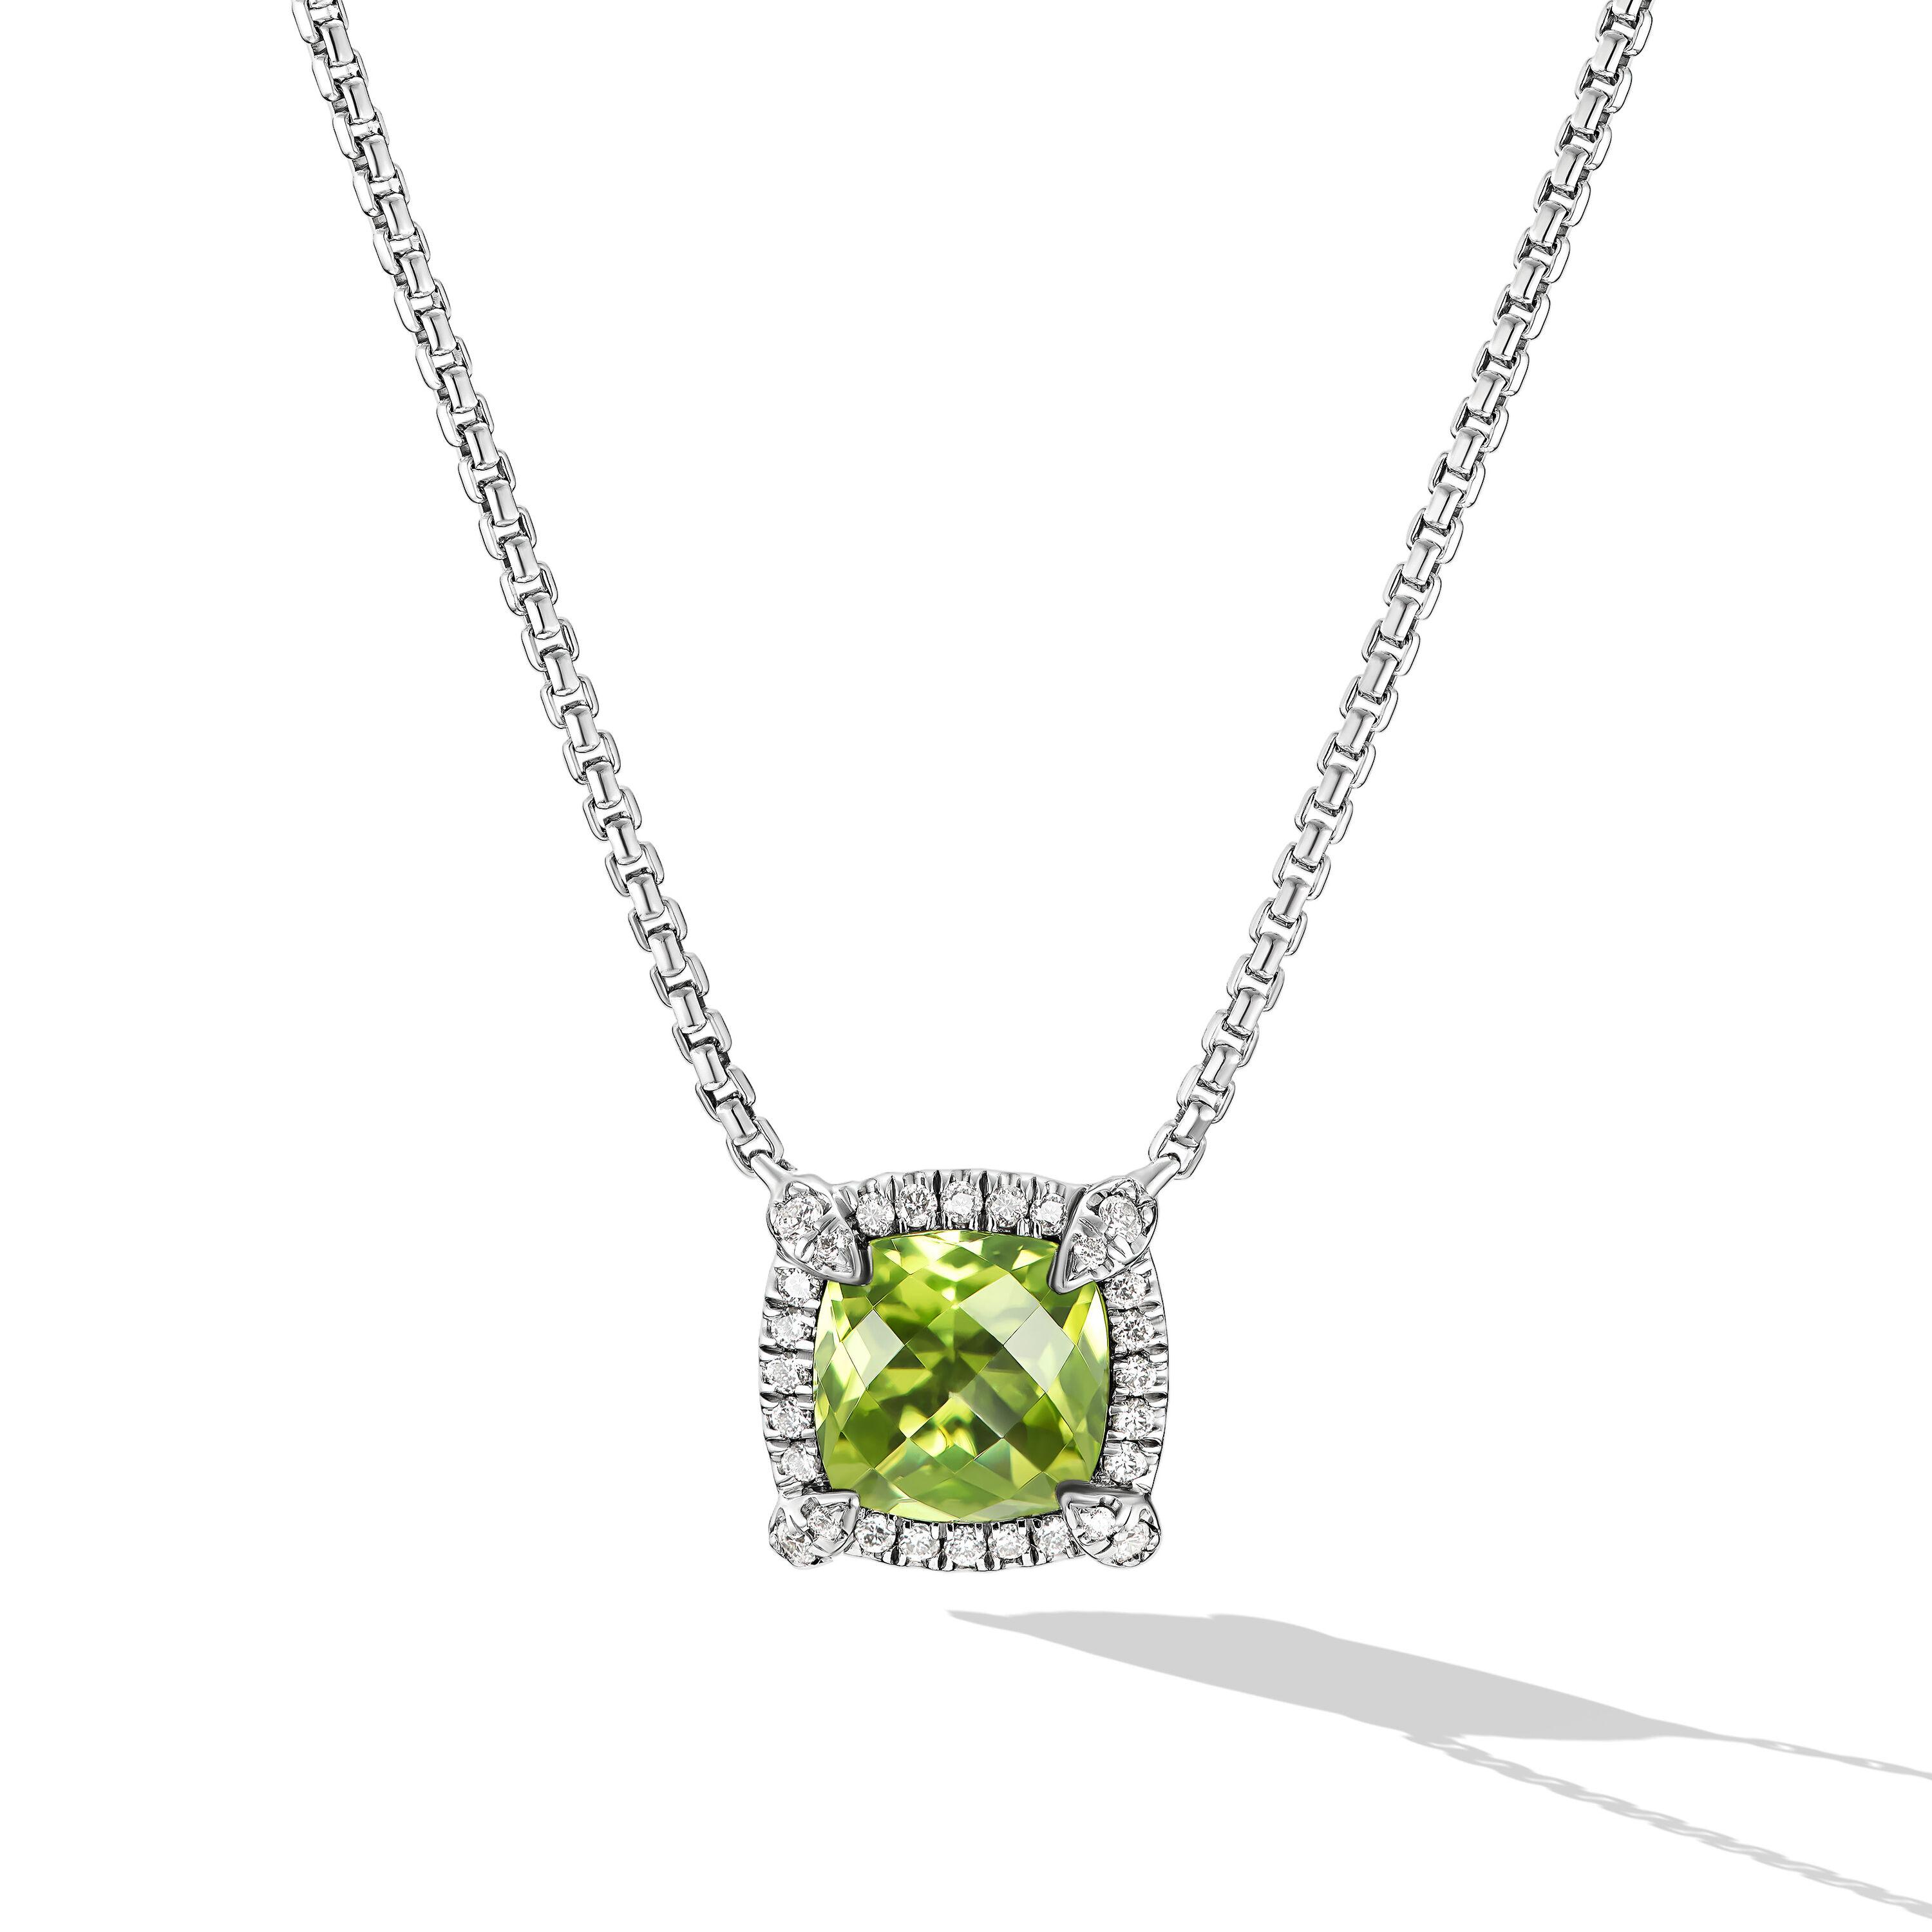 David Yurman Petite Chatelaine Pave Bezel Pendant Necklace in Sterling Silver with Peridot and Diamonds 0